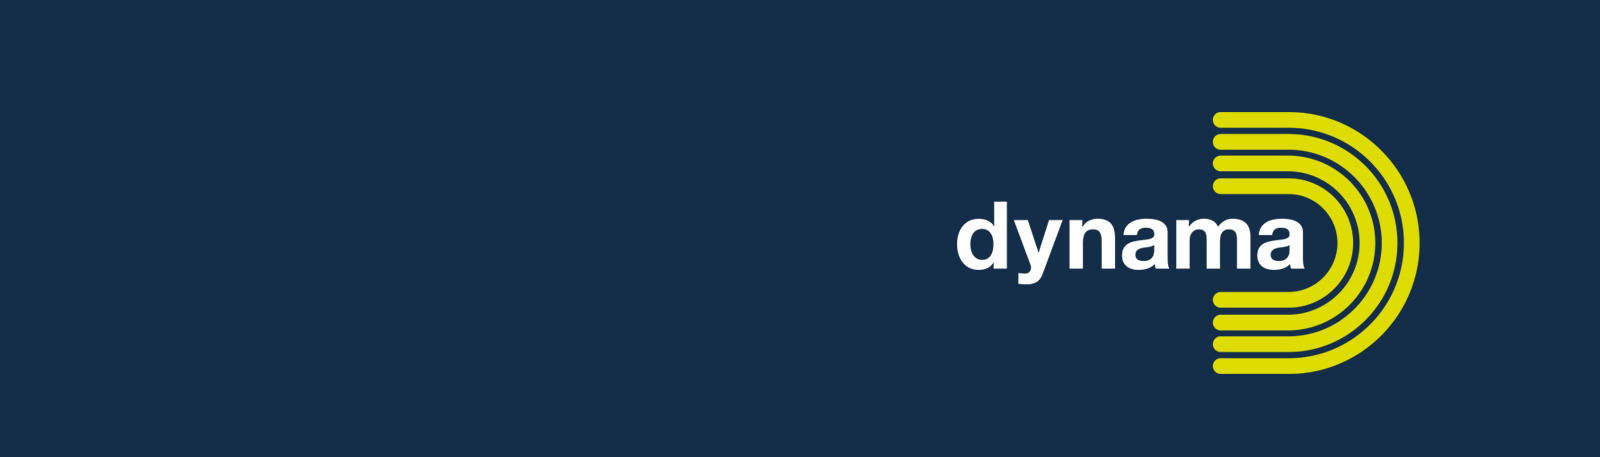 Dynama opens a new office in Canberra, Australia to support business growth and to offer enhanced customer services